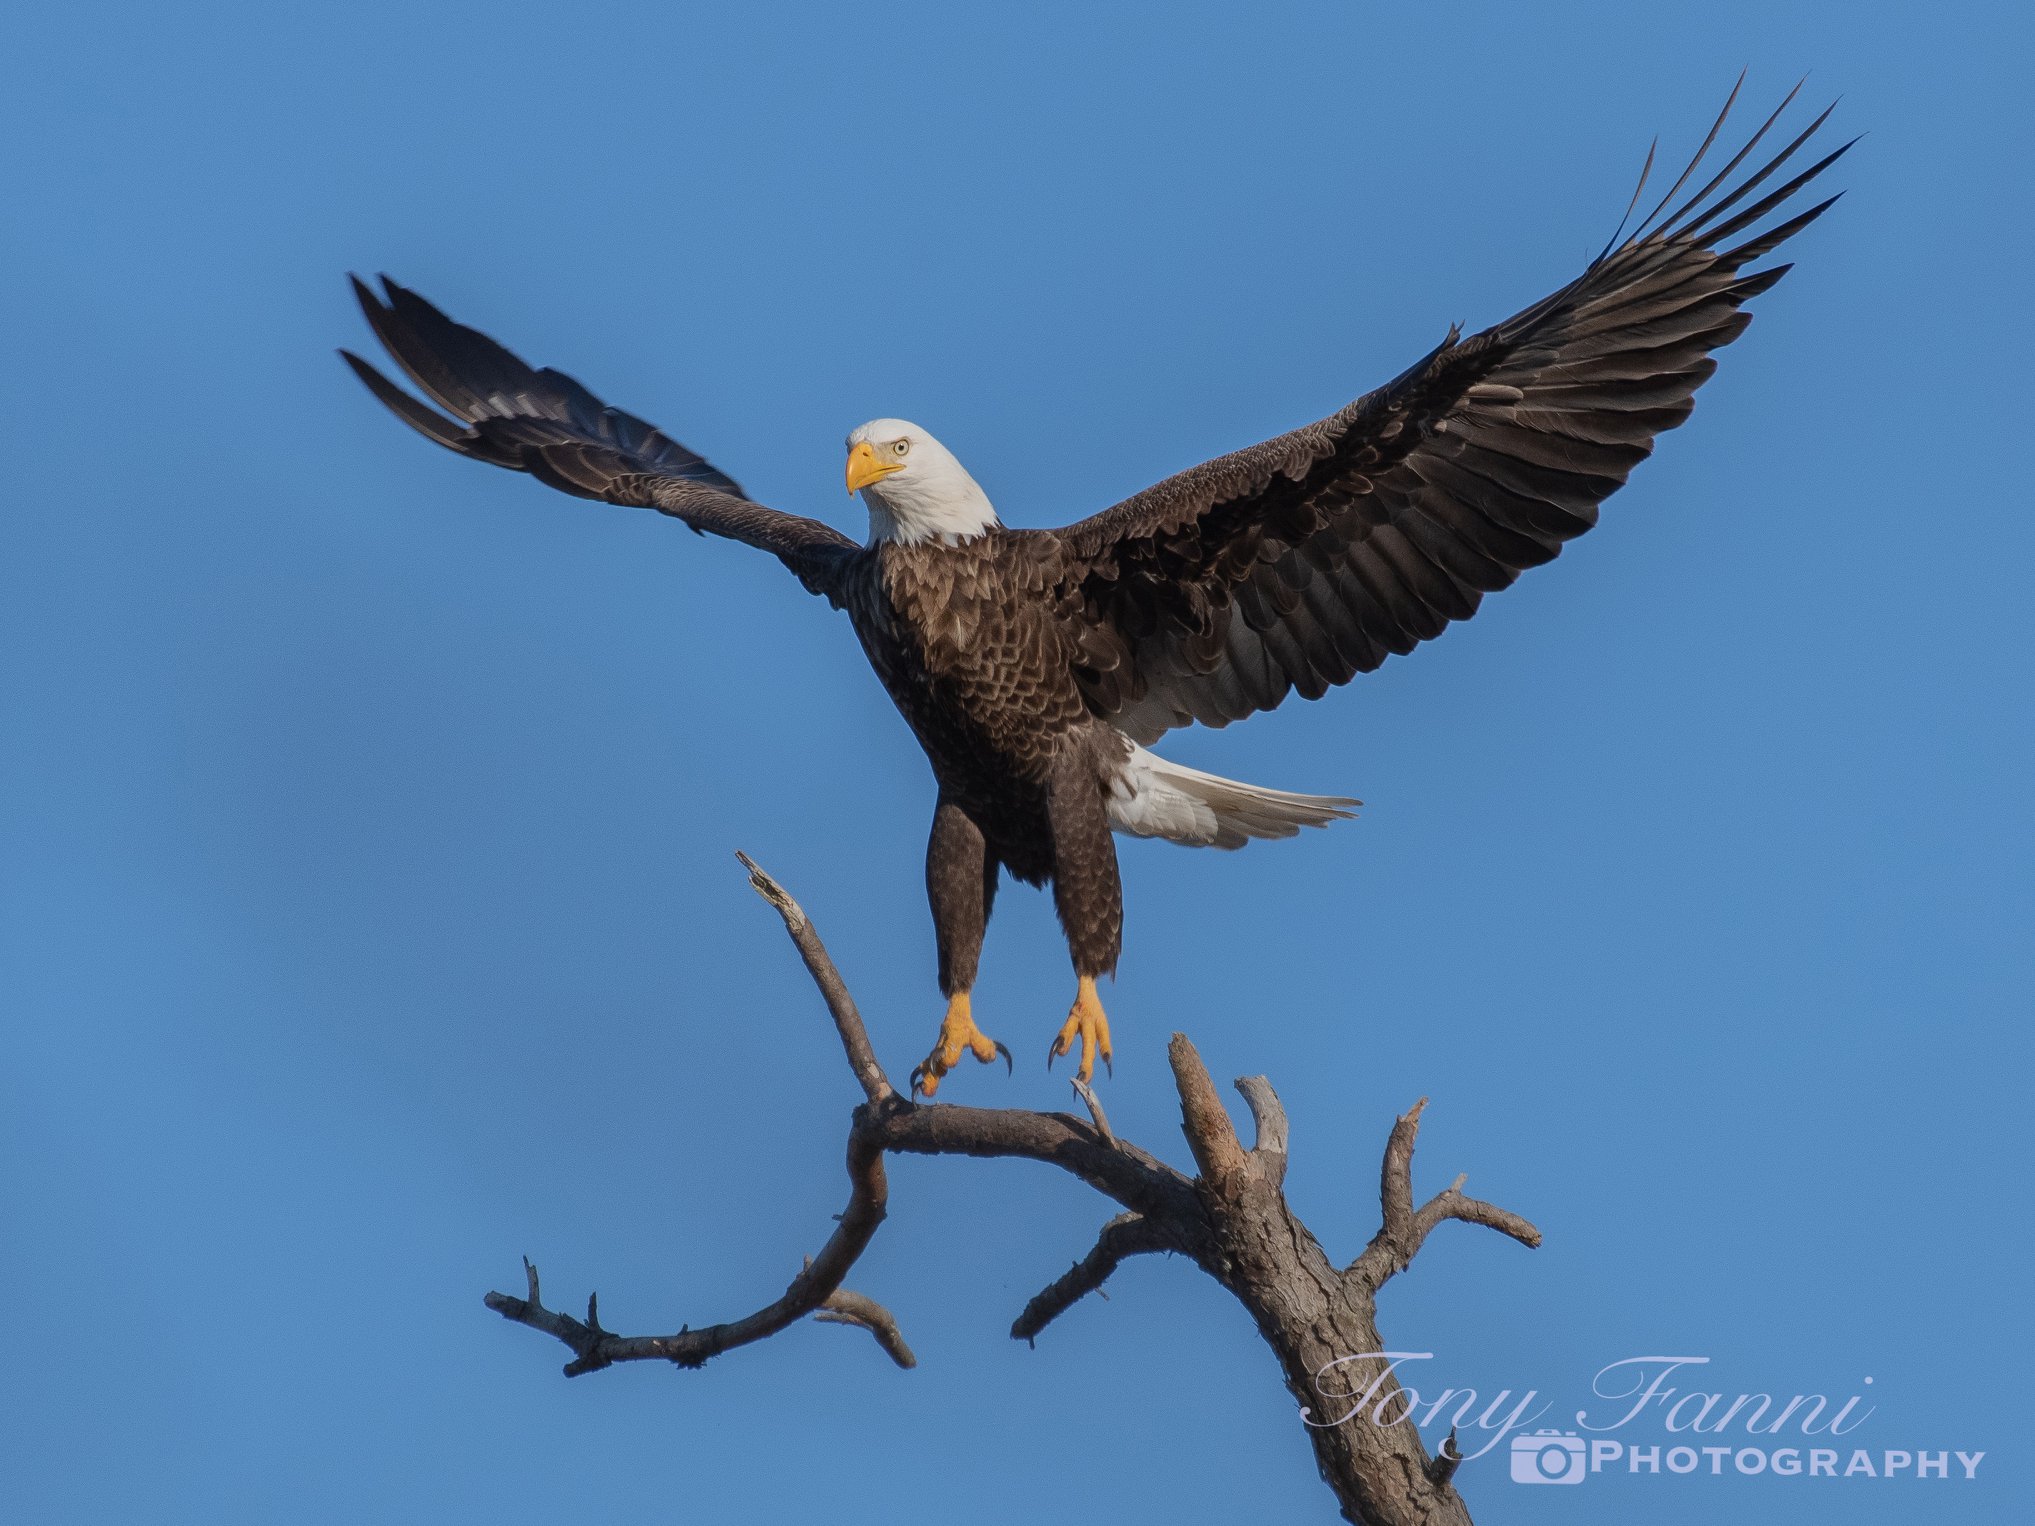 Best Of Long Island Wildlife Photography Easter Edition Fire Island And Beyond